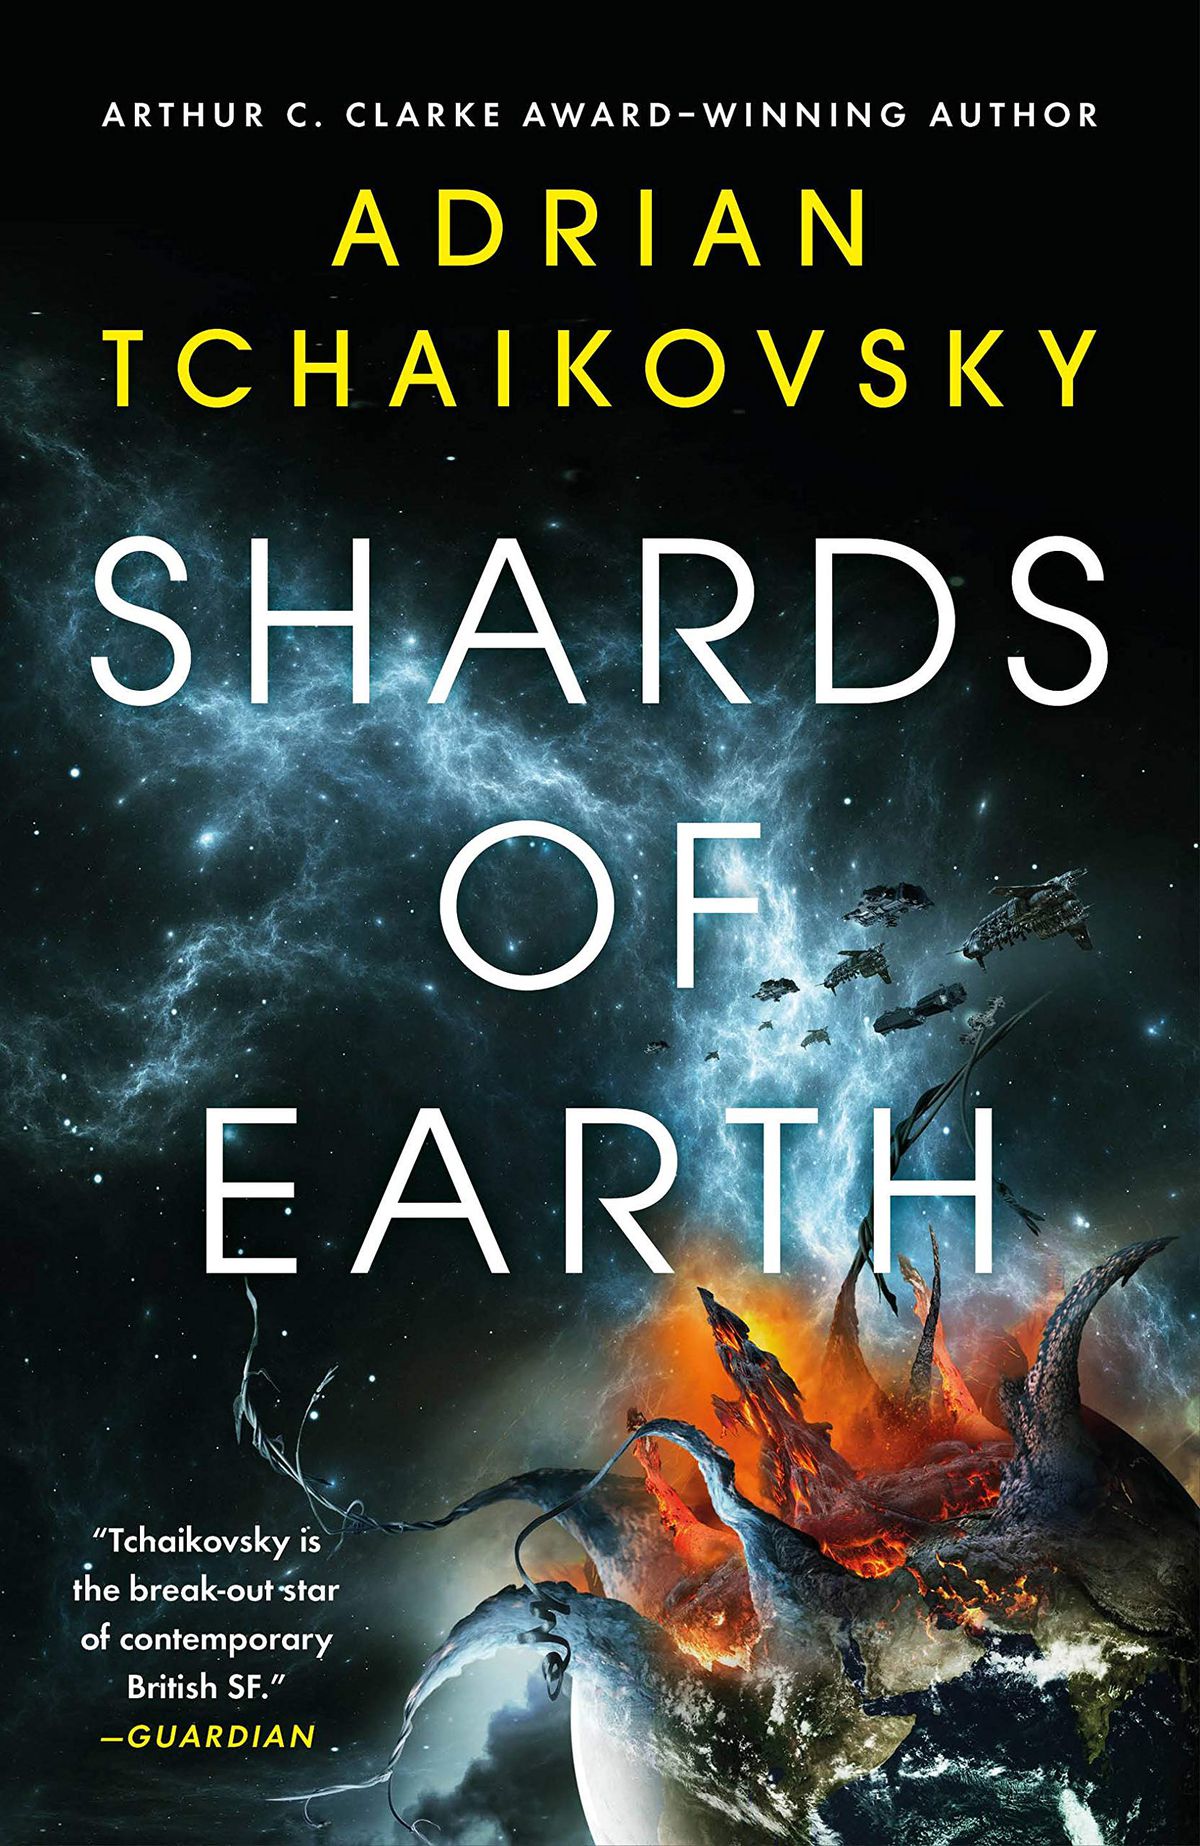 The cover of “Shards of Earth” by Adrian Tchaikovsky showing an exploding planet